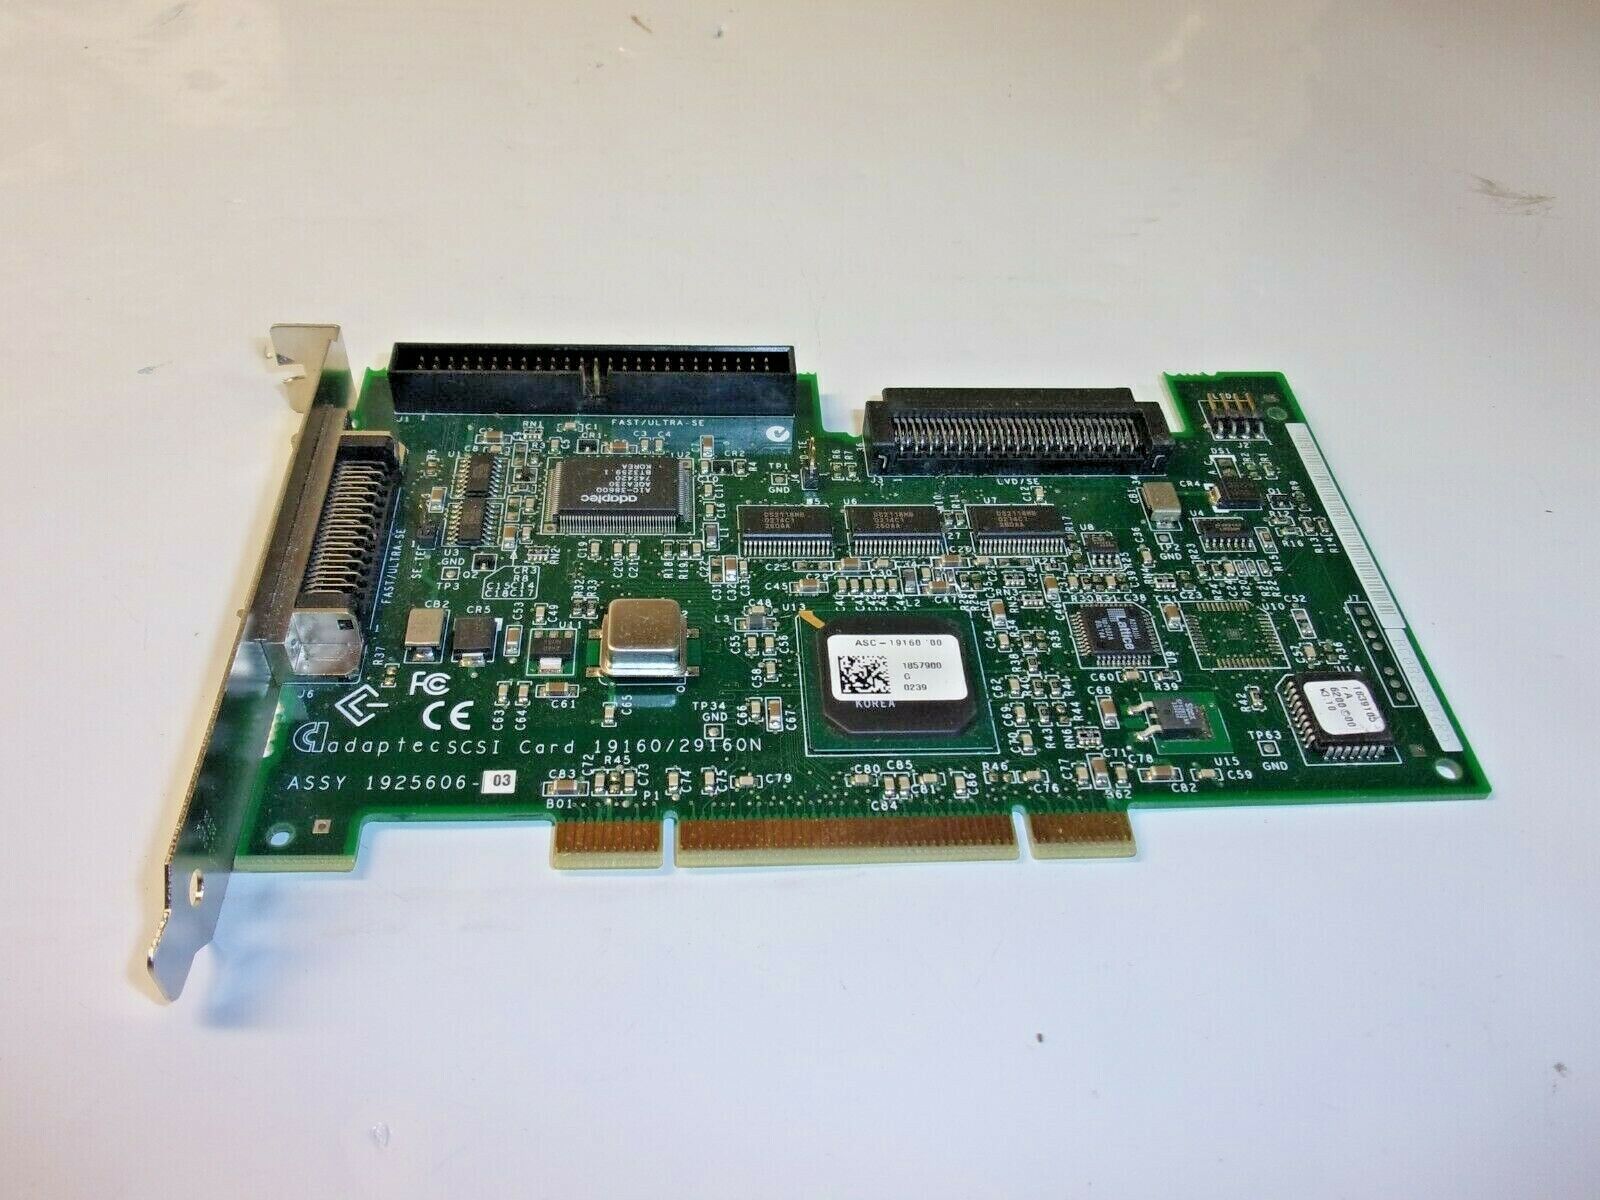 Adaptec ASSY1925606-01 SCSI INTERFACE CARD CONTROLLER 19160\29160N DELL